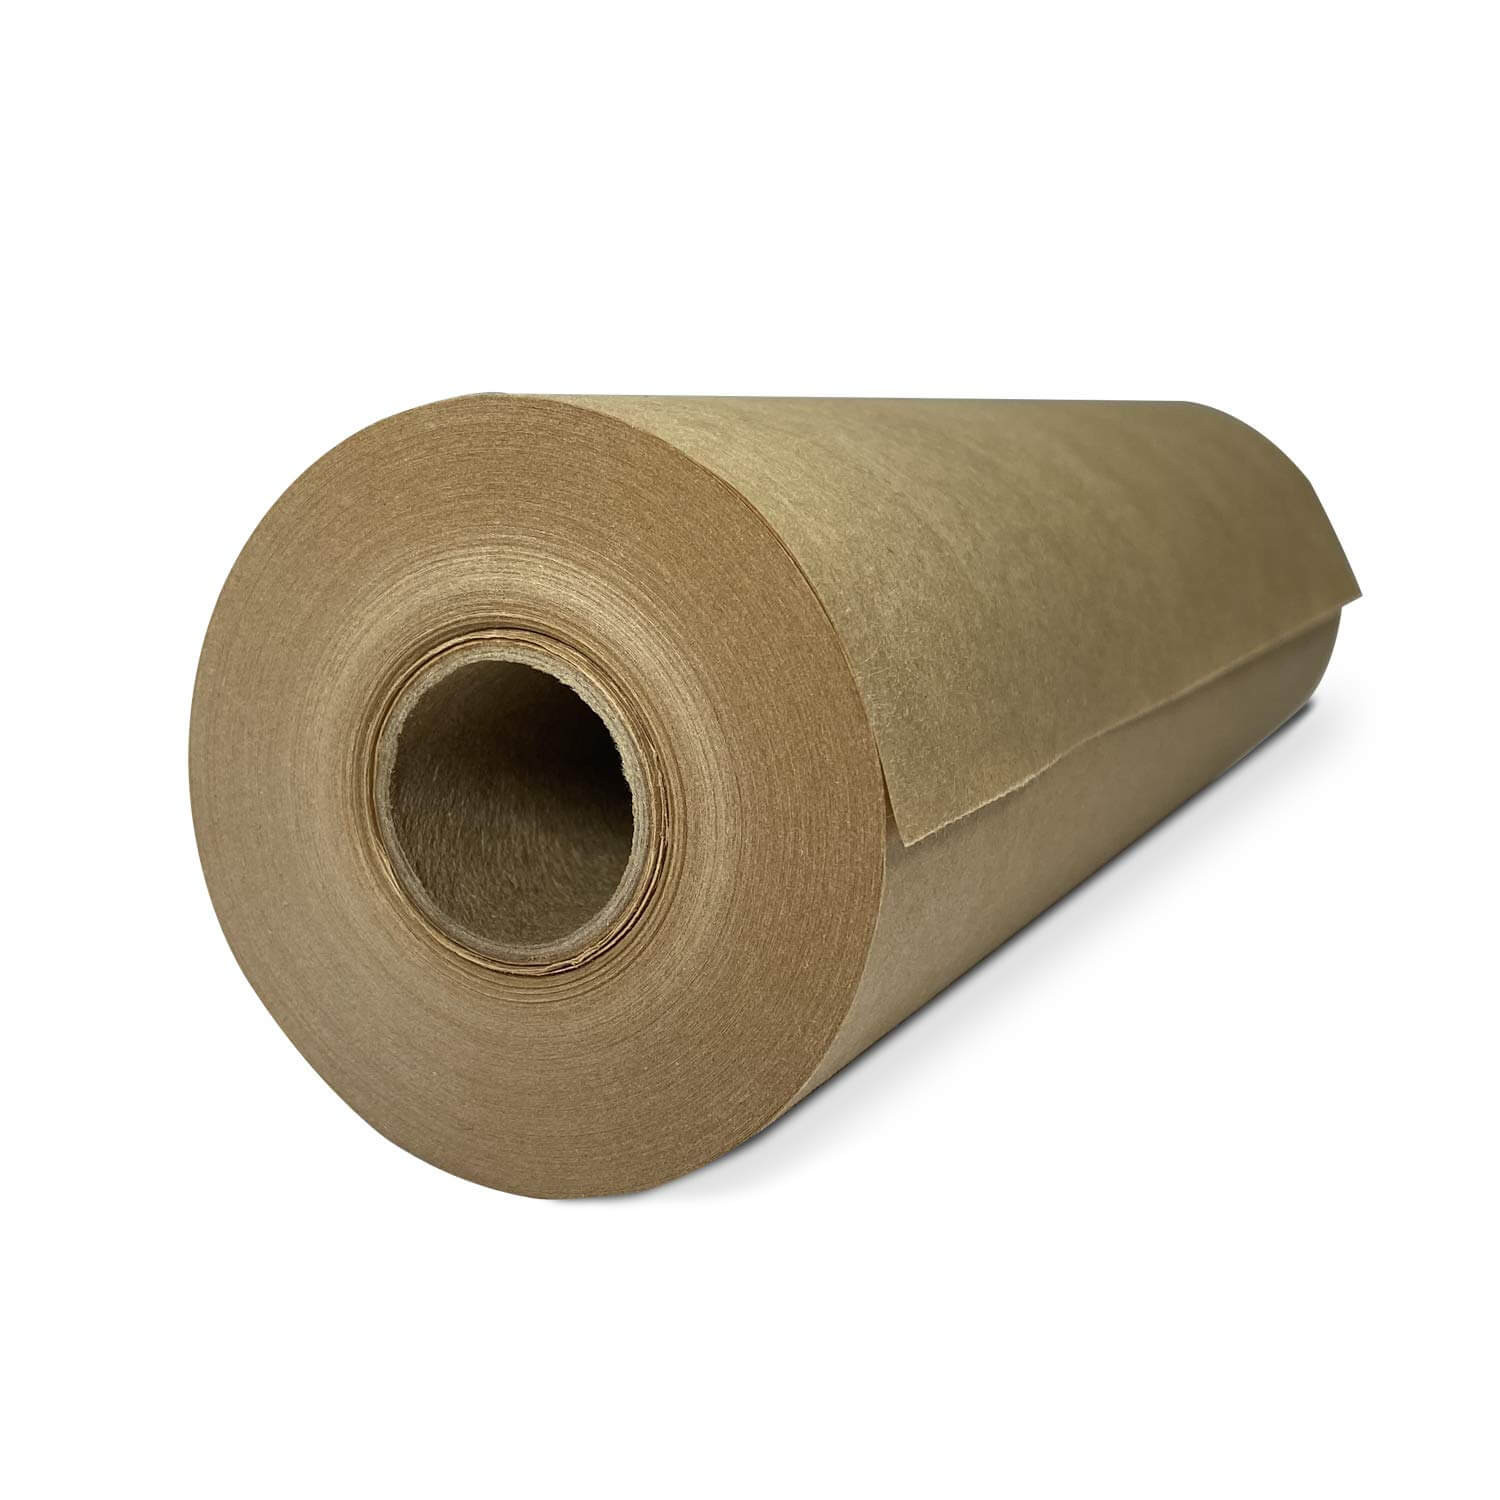 IDL Packaging Idl Packaging 48 X 180 Feet (2160 Inches) Brown Kraft Paper  Roll, 30 Lbs (Pack Of 6) - Heavy Duty Paper For Packing, Moving, Shi